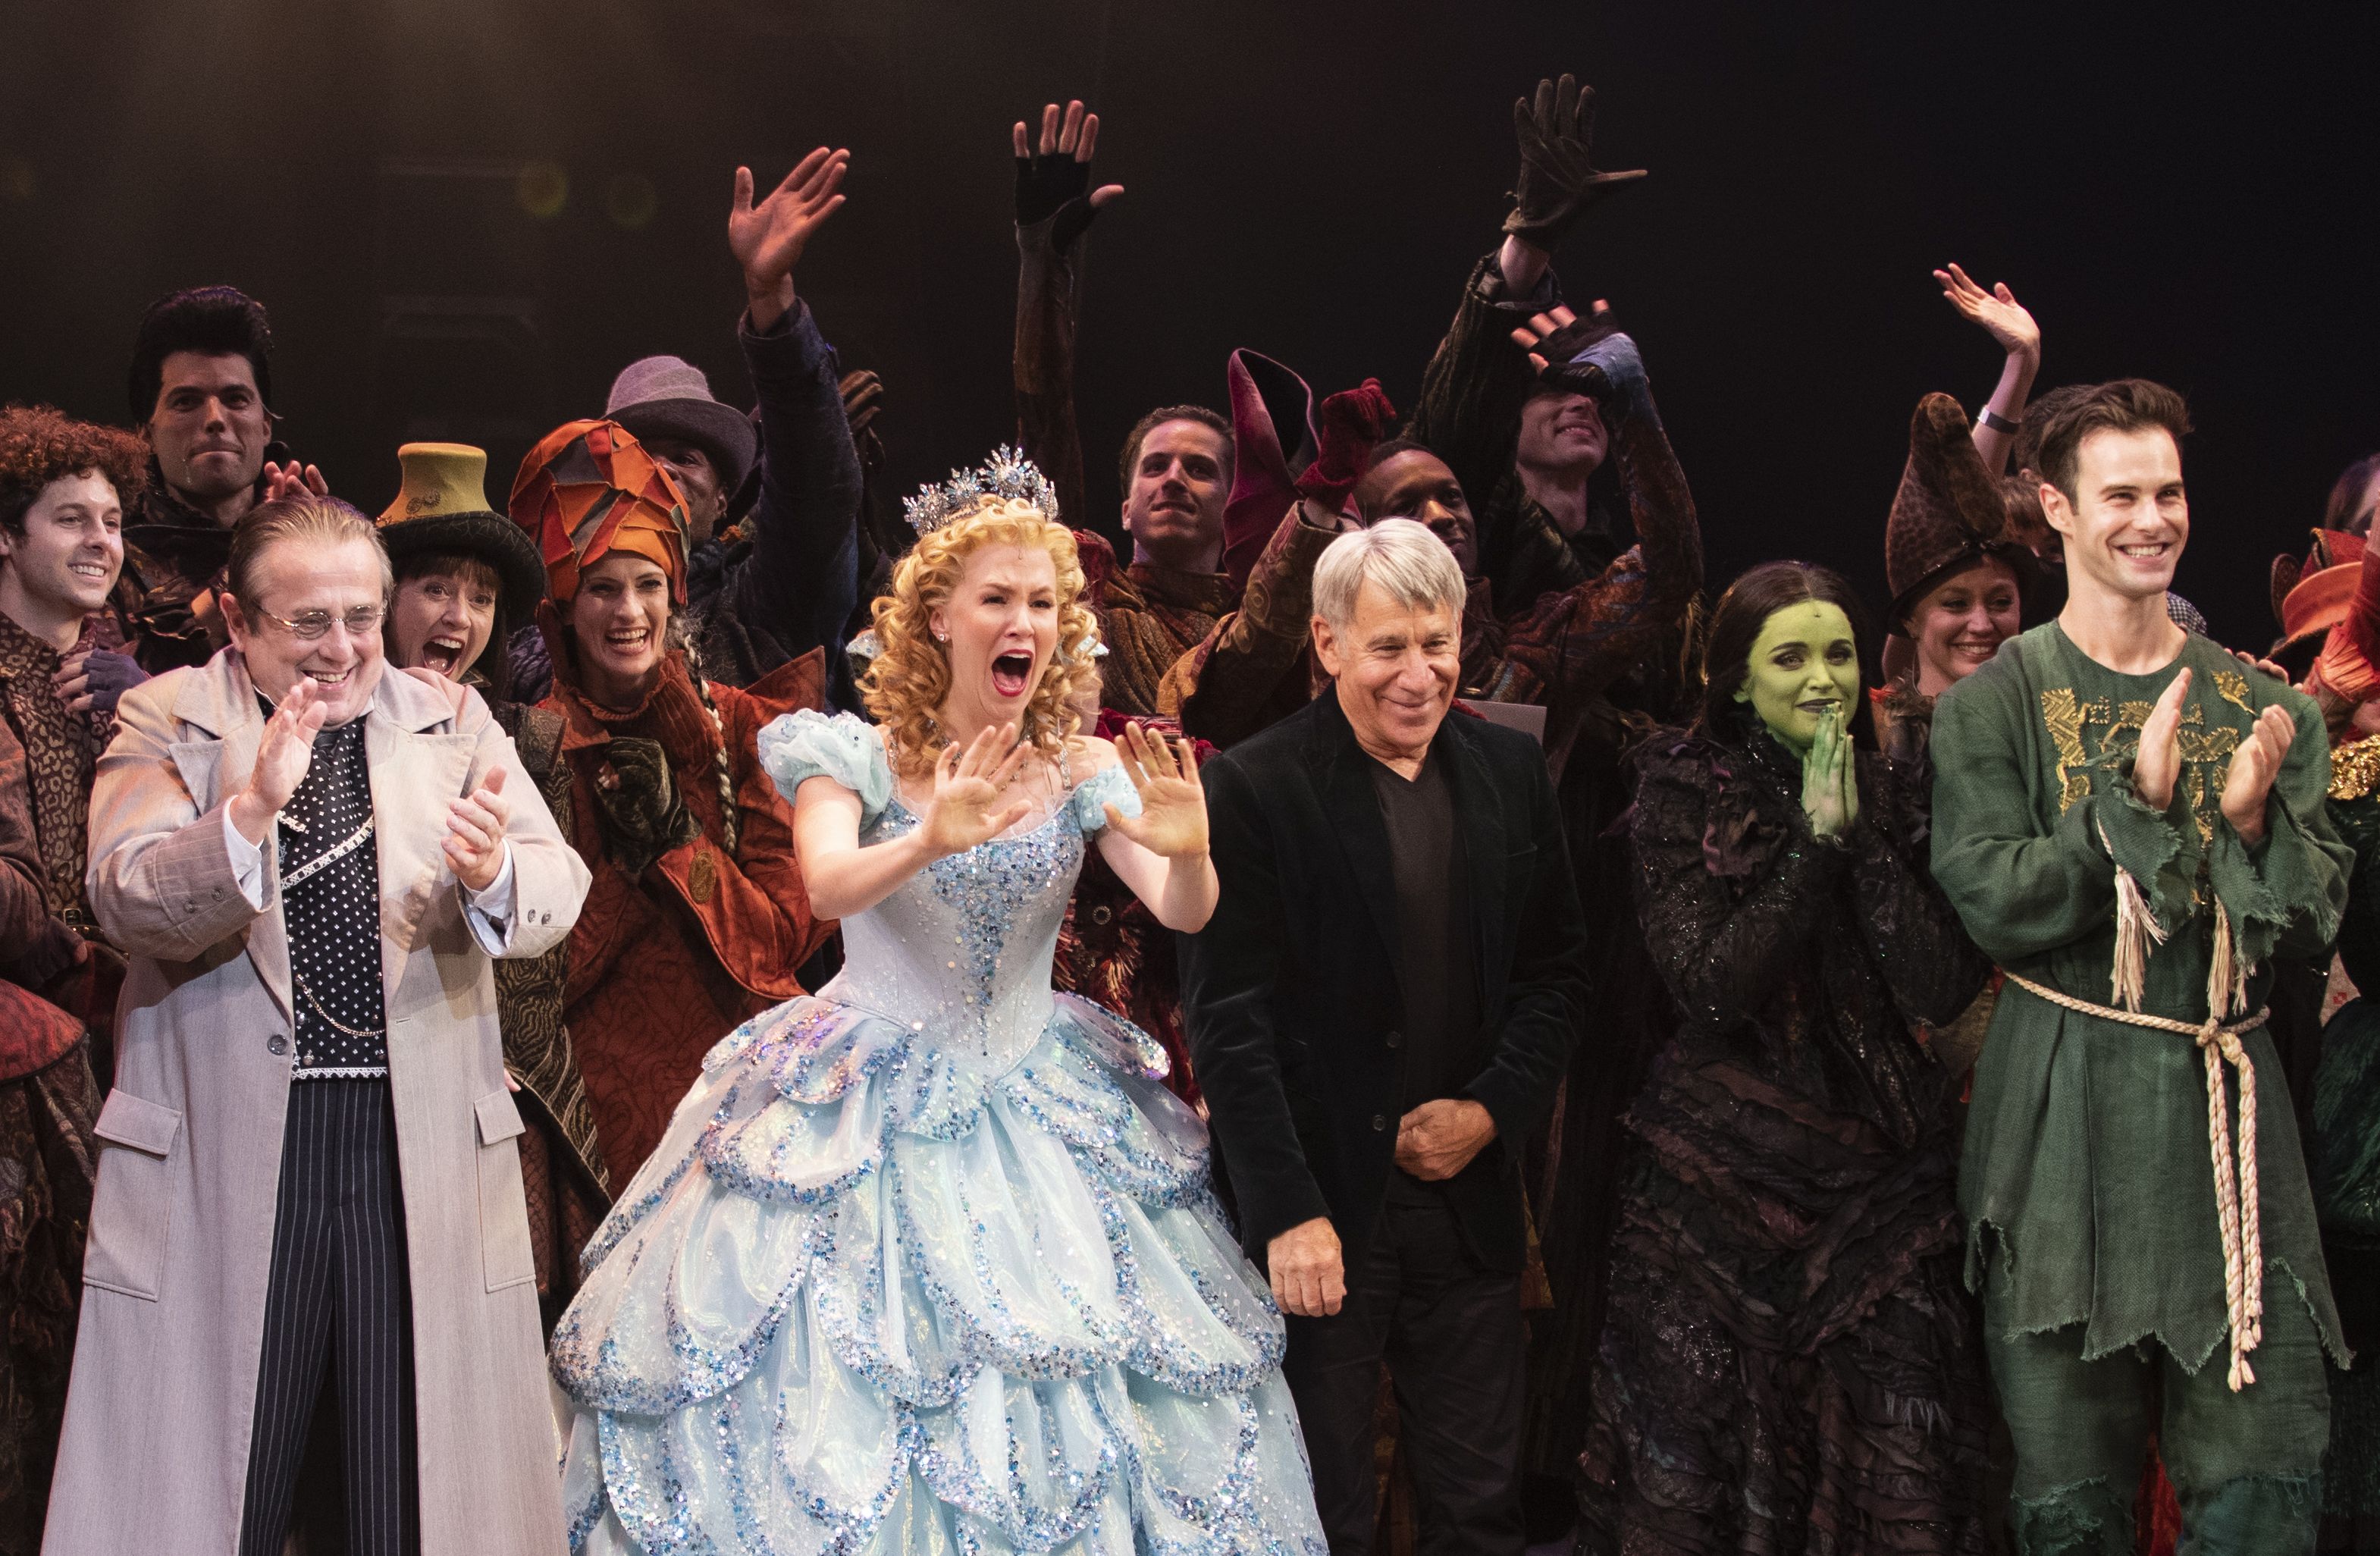 Picture of the "Wicked" cast